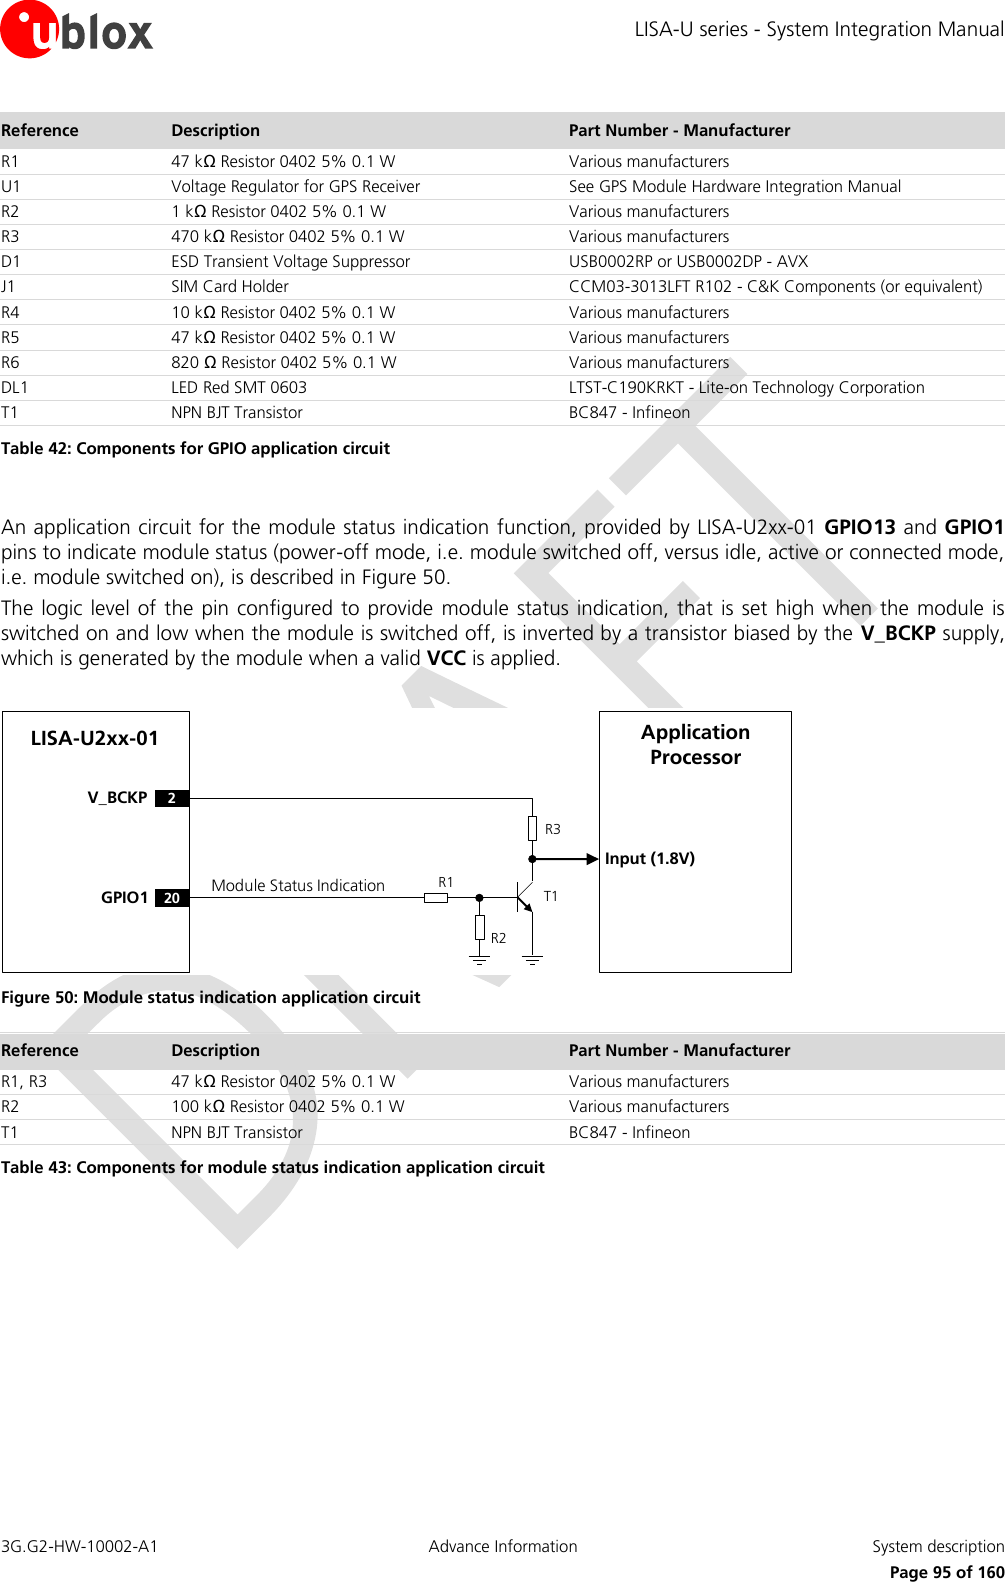 LISA-U series - System Integration Manual 3G.G2-HW-10002-A1  Advance Information  System description      Page 95 of 160 Reference Description Part Number - Manufacturer R1 47 kΩ Resistor 0402 5% 0.1 W Various manufacturers U1 Voltage Regulator for GPS Receiver See GPS Module Hardware Integration Manual R2 1 kΩ Resistor 0402 5% 0.1 W Various manufacturers R3 470 kΩ Resistor 0402 5% 0.1 W Various manufacturers D1 ESD Transient Voltage Suppressor USB0002RP or USB0002DP - AVX J1 SIM Card Holder CCM03-3013LFT R102 - C&amp;K Components (or equivalent) R4 10 kΩ Resistor 0402 5% 0.1 W Various manufacturers R5 47 kΩ Resistor 0402 5% 0.1 W Various manufacturers R6 820 Ω Resistor 0402 5% 0.1 W Various manufacturers DL1 LED Red SMT 0603 LTST-C190KRKT - Lite-on Technology Corporation T1 NPN BJT Transistor  BC847 - Infineon Table 42: Components for GPIO application circuit  An application circuit for the module status indication function, provided by LISA-U2xx-01 GPIO13 and GPIO1 pins to indicate module status (power-off mode, i.e. module switched off, versus idle, active or connected mode, i.e. module switched on), is described in Figure 50. The logic level of the  pin configured to provide  module status indication, that  is set high when the module  is switched on and low when the module is switched off, is inverted by a transistor biased by the V_BCKP supply, which is generated by the module when a valid VCC is applied.  Input (1.8V)V_BCKP 2LISA-U2xx-01 Application ProcessorR1R3Module Status IndicationR220GPIO1 T1 Figure 50: Module status indication application circuit Reference Description Part Number - Manufacturer R1, R3 47 kΩ Resistor 0402 5% 0.1 W Various manufacturers R2 100 kΩ Resistor 0402 5% 0.1 W Various manufacturers T1 NPN BJT Transistor  BC847 - Infineon Table 43: Components for module status indication application circuit  